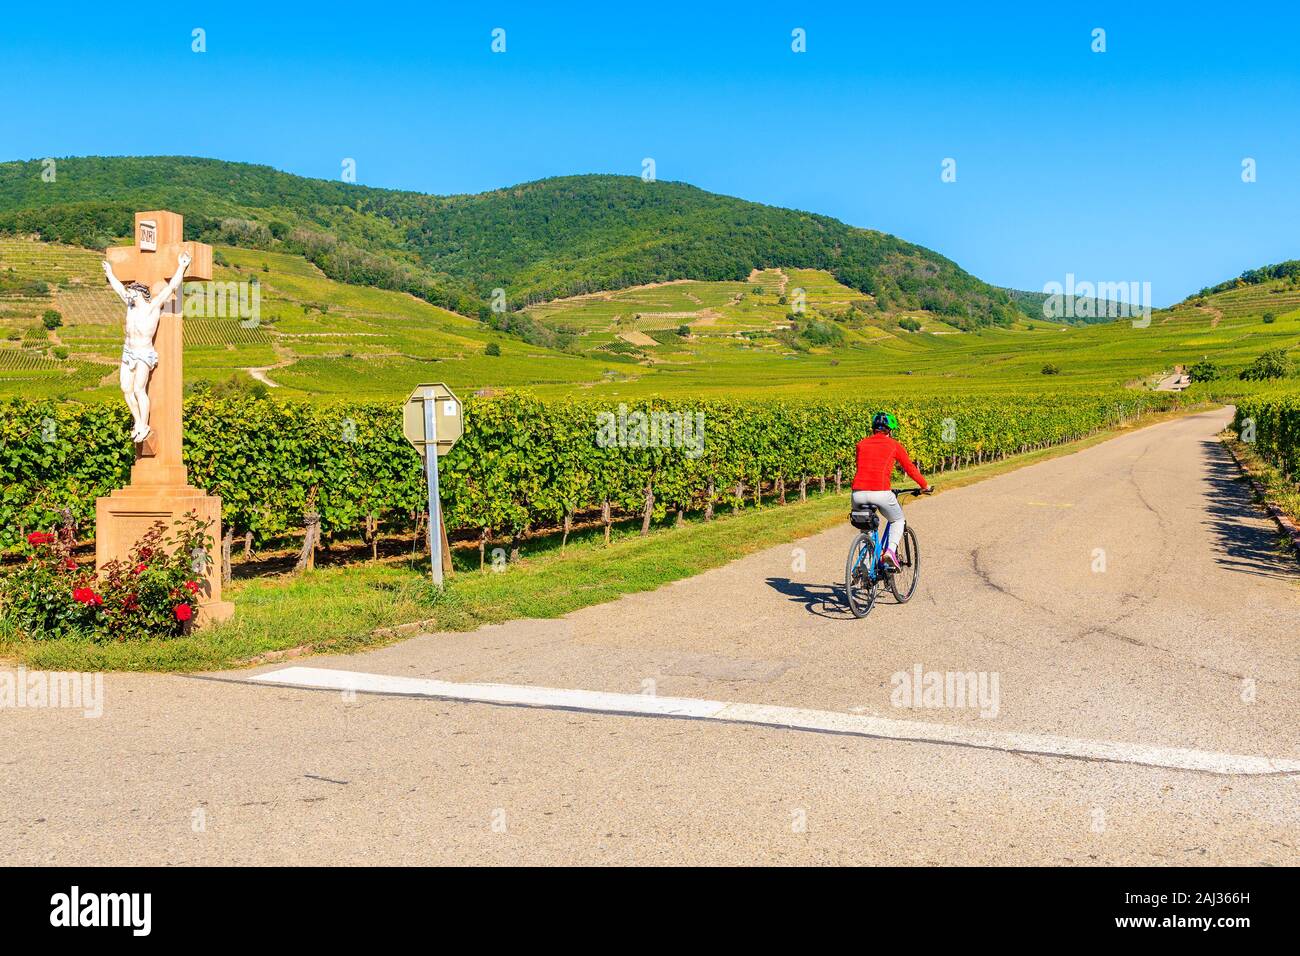 Young woman cycling among vineyards on road near Kientzheim village on Alsatian Wine Route, France Stock Photo